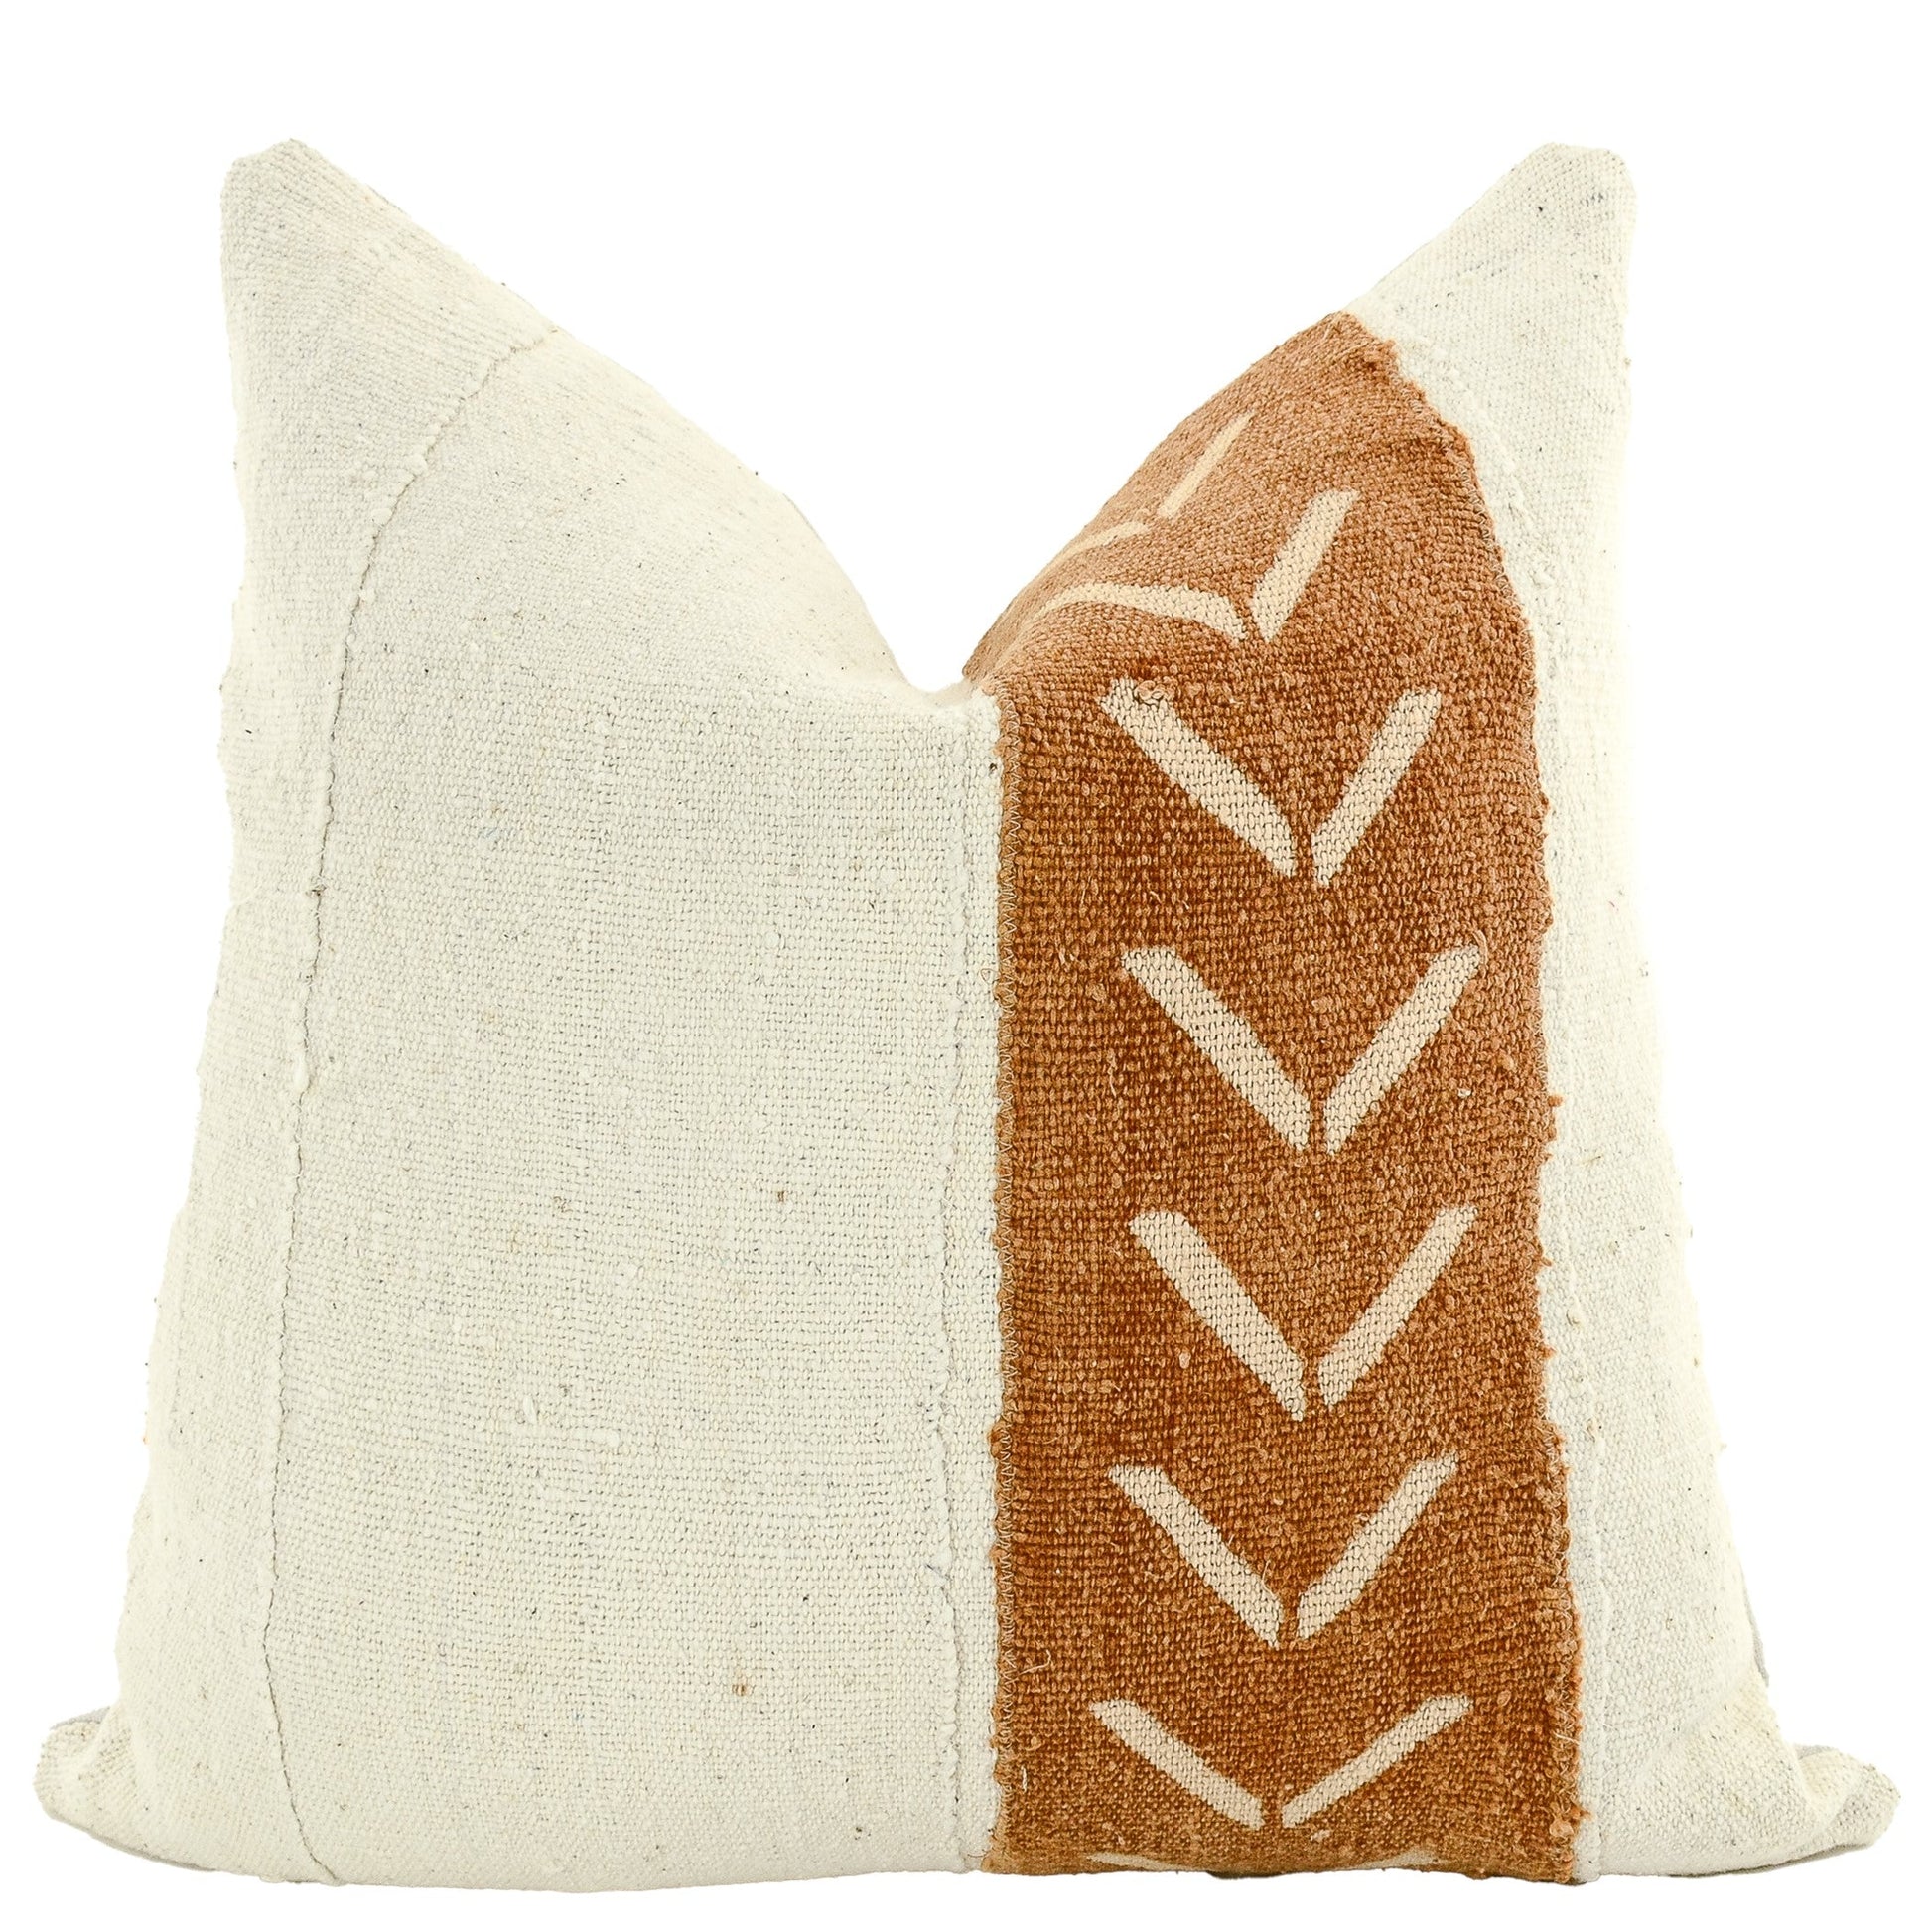 Front of pillow with rich brown and white patterns along with solid white made from two traditional handwoven mudcloth textile sheets from Mali West Africa